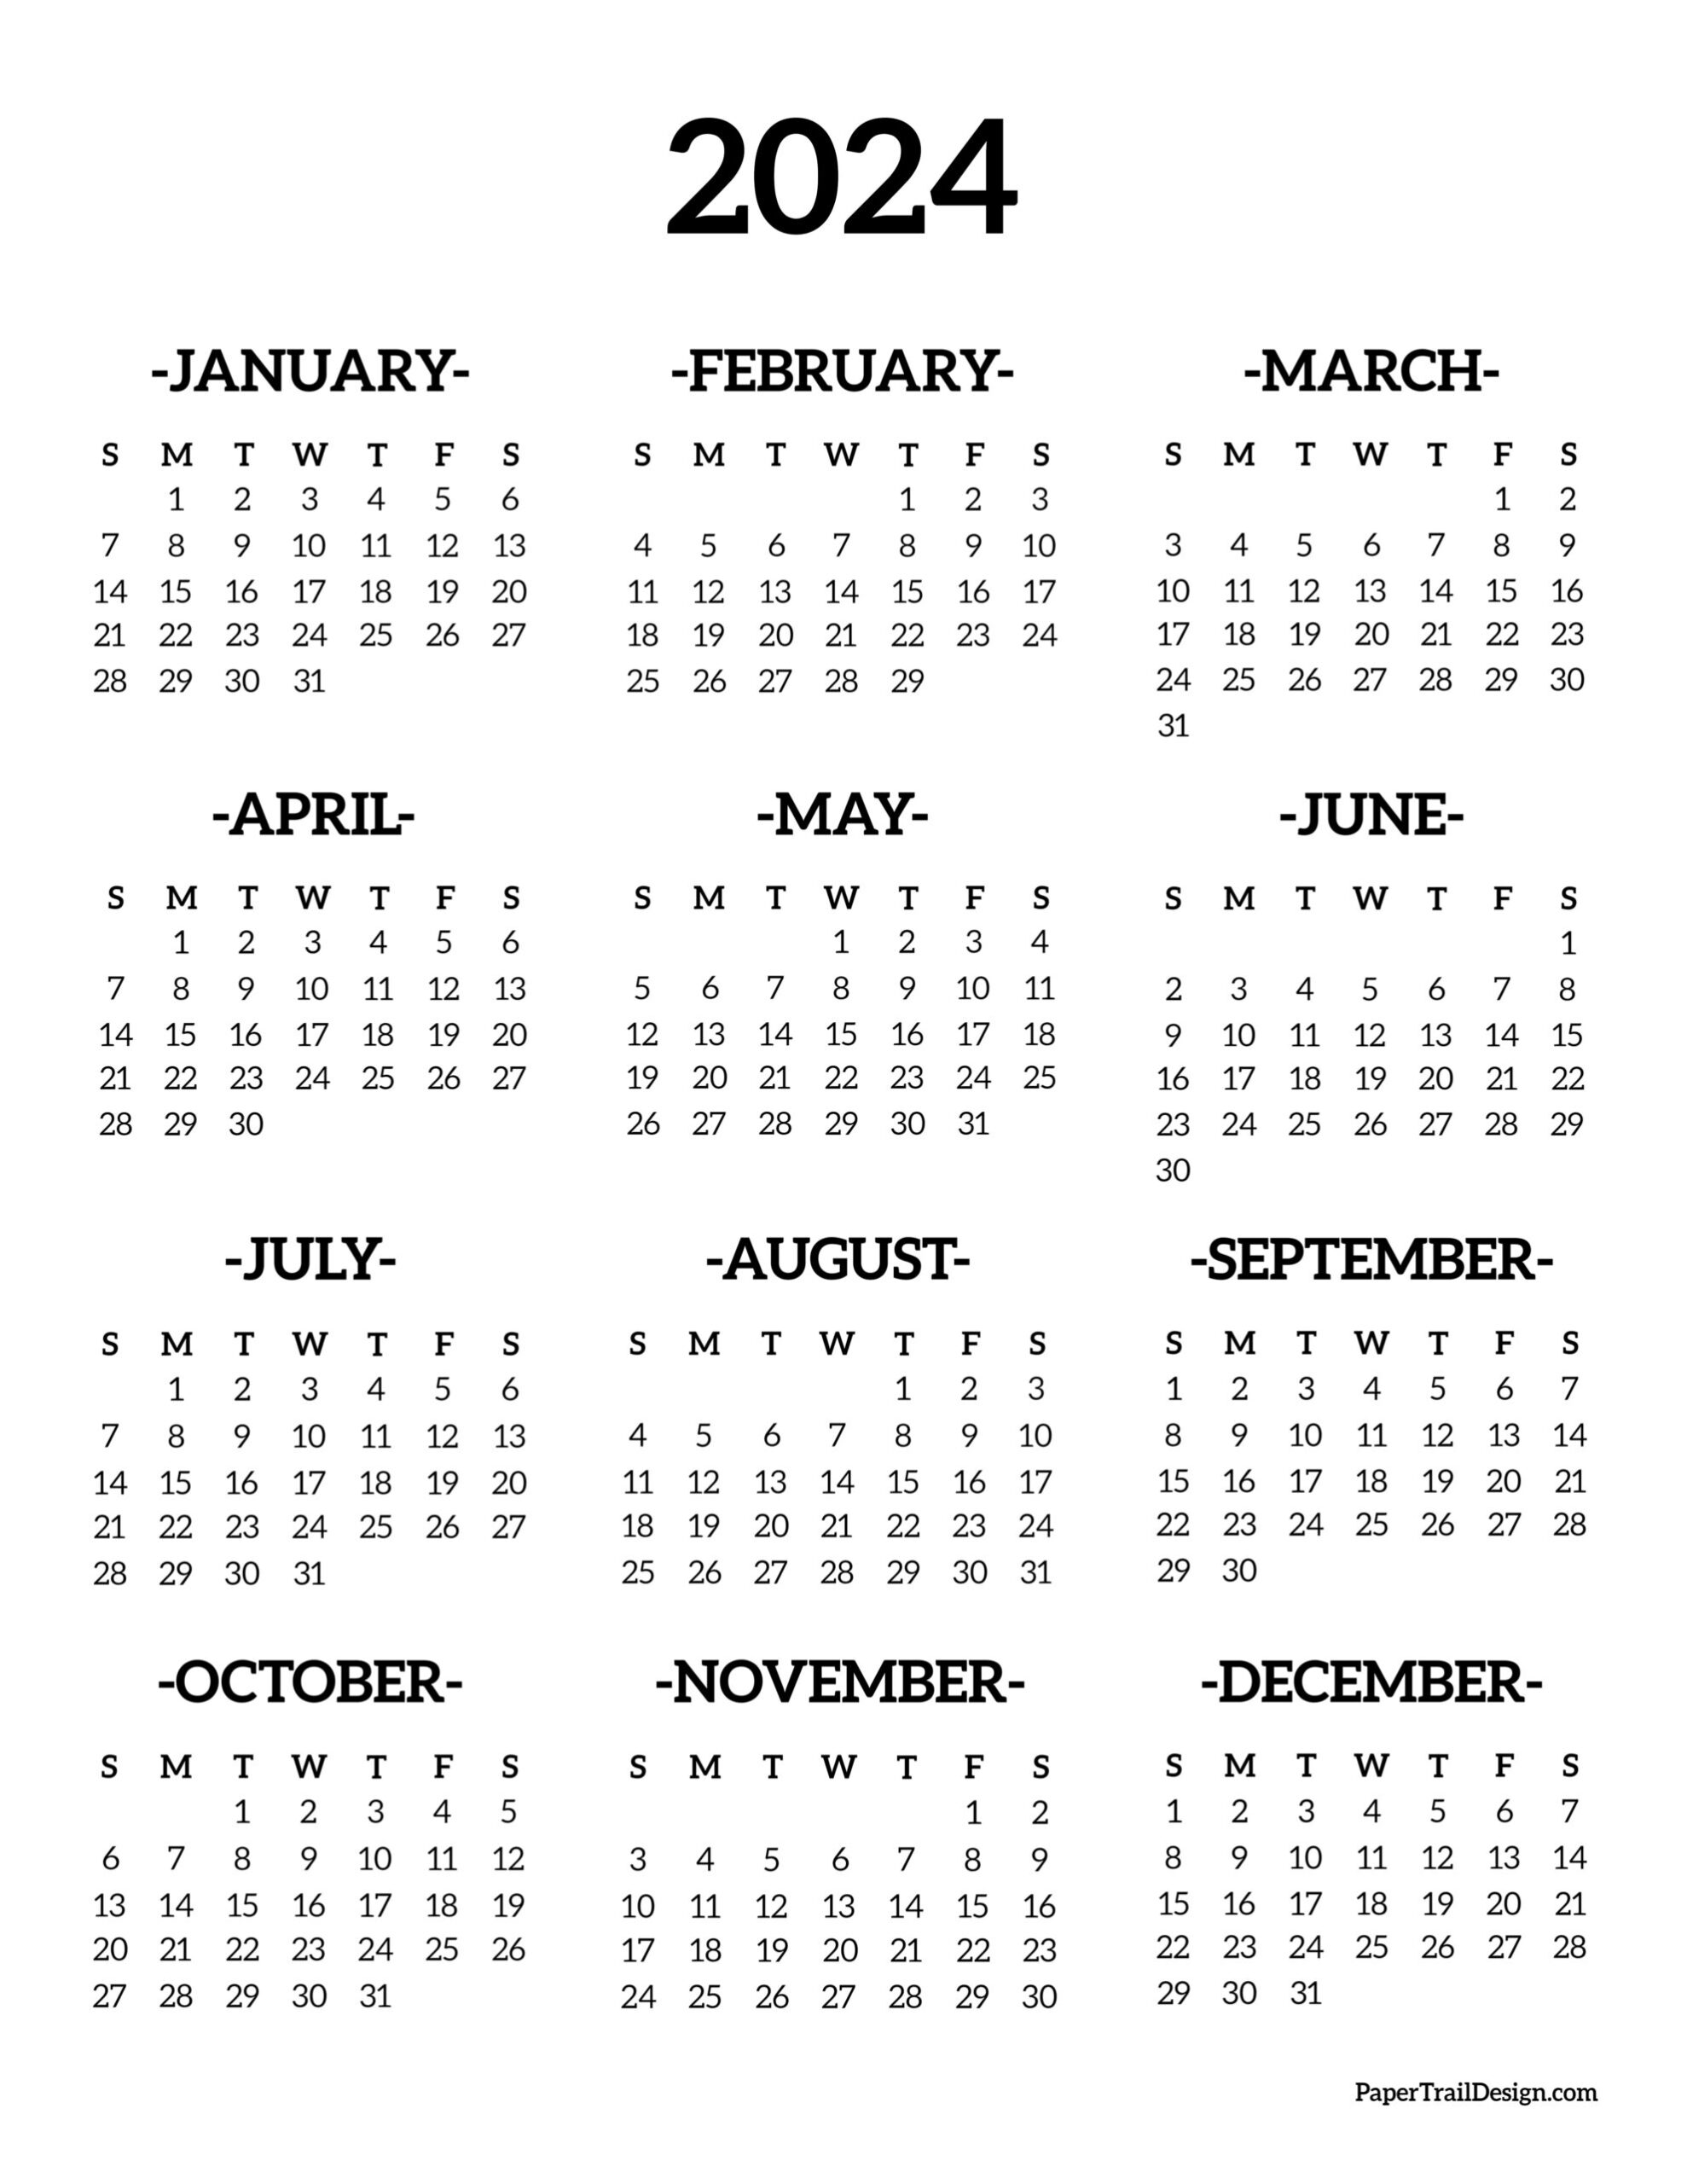 Calendar 2024 Printable One Page - Paper Trail Design for 2024 Calendar Pages Printable